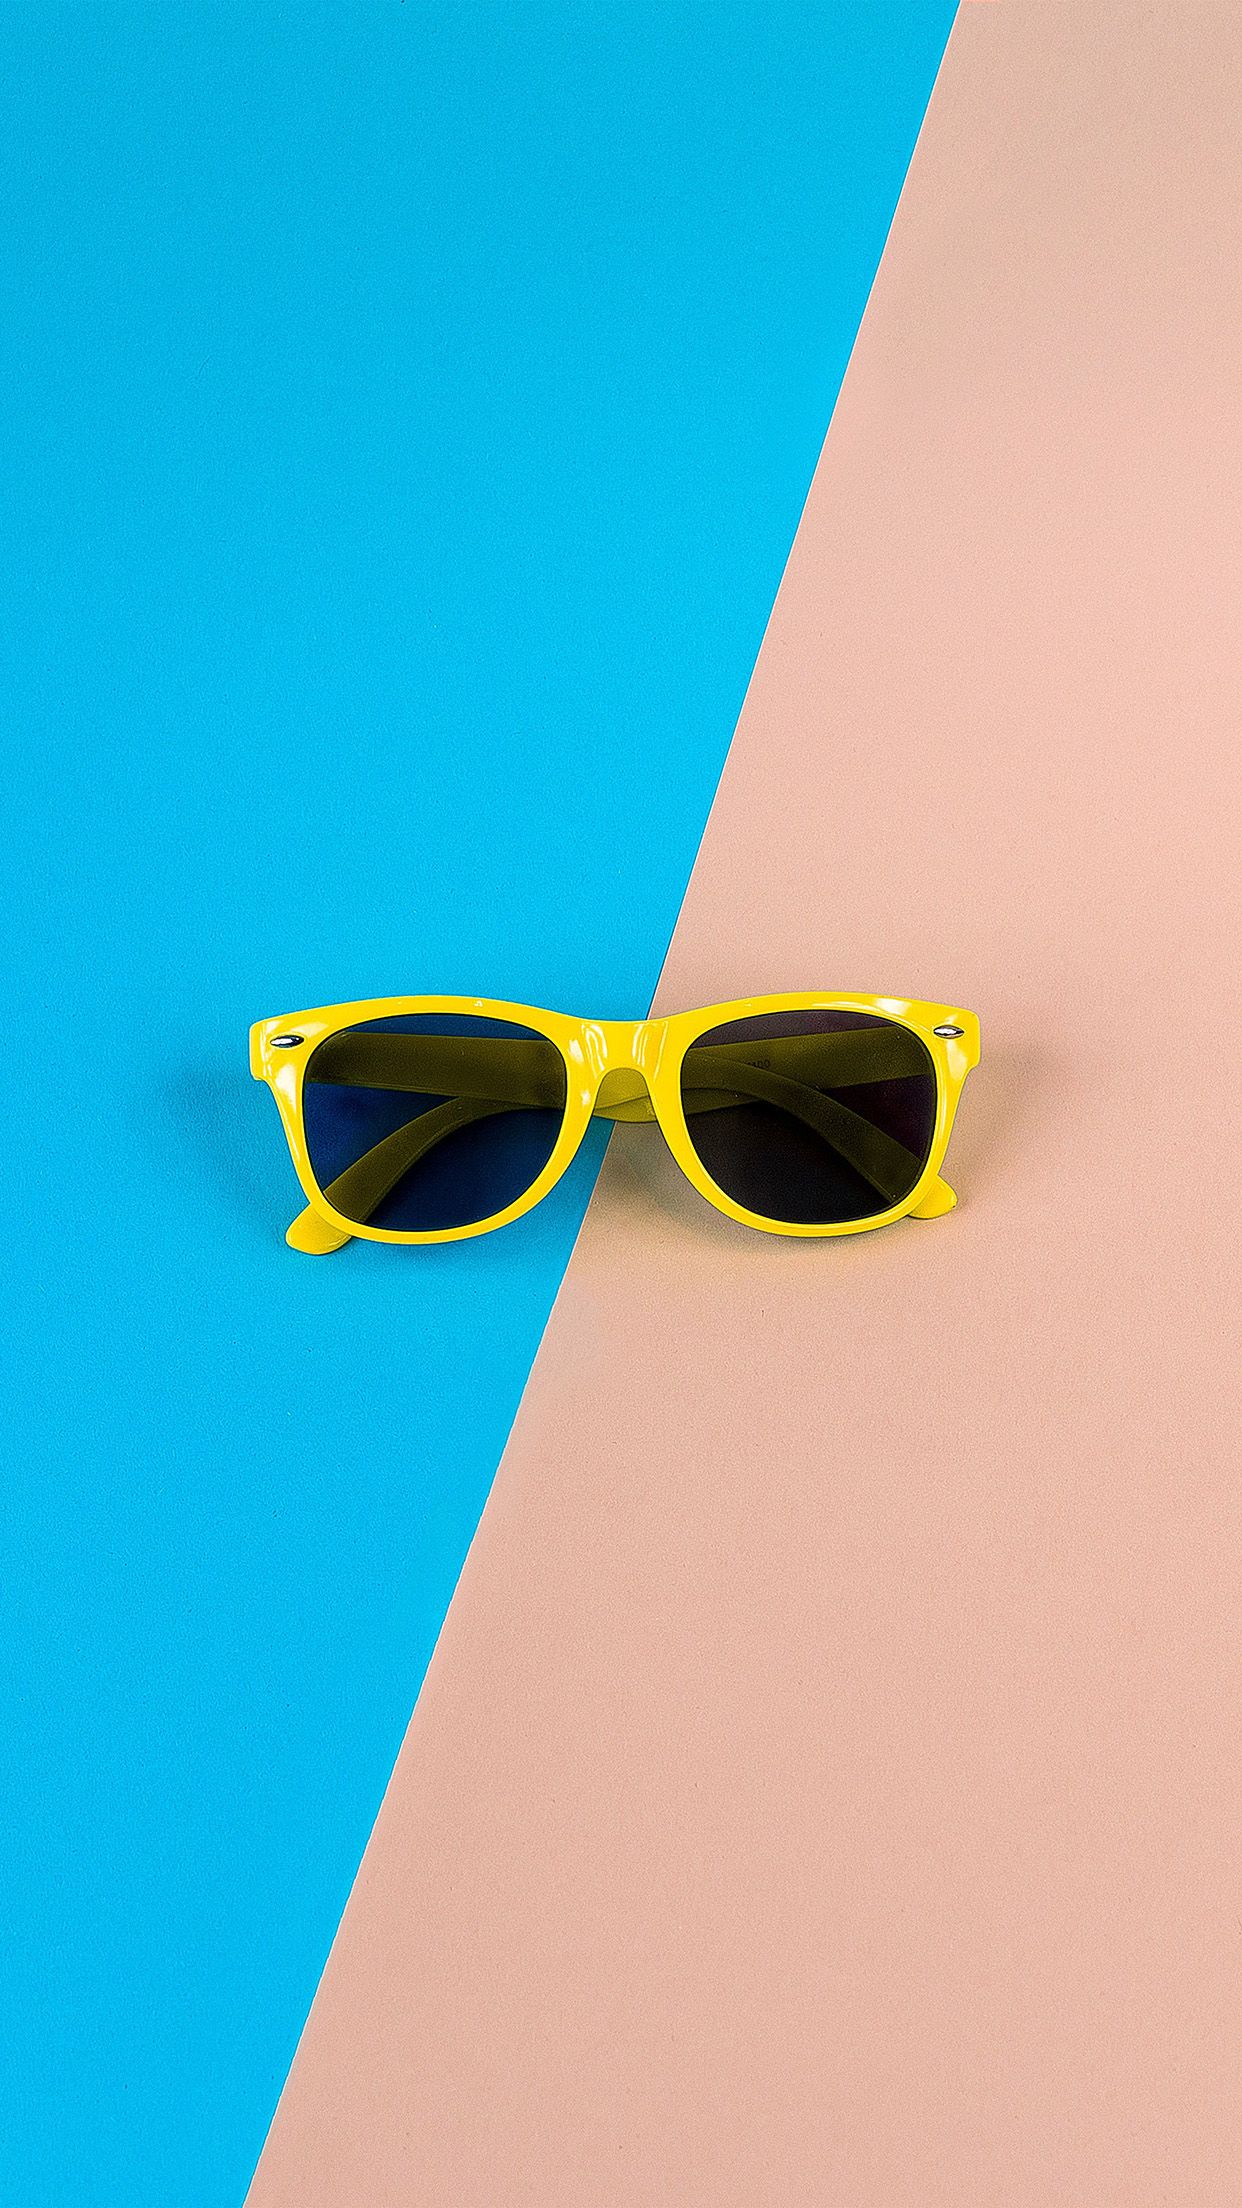 Minimal glasses pink blue yellow Download Free Wallpaper for iPhone 6